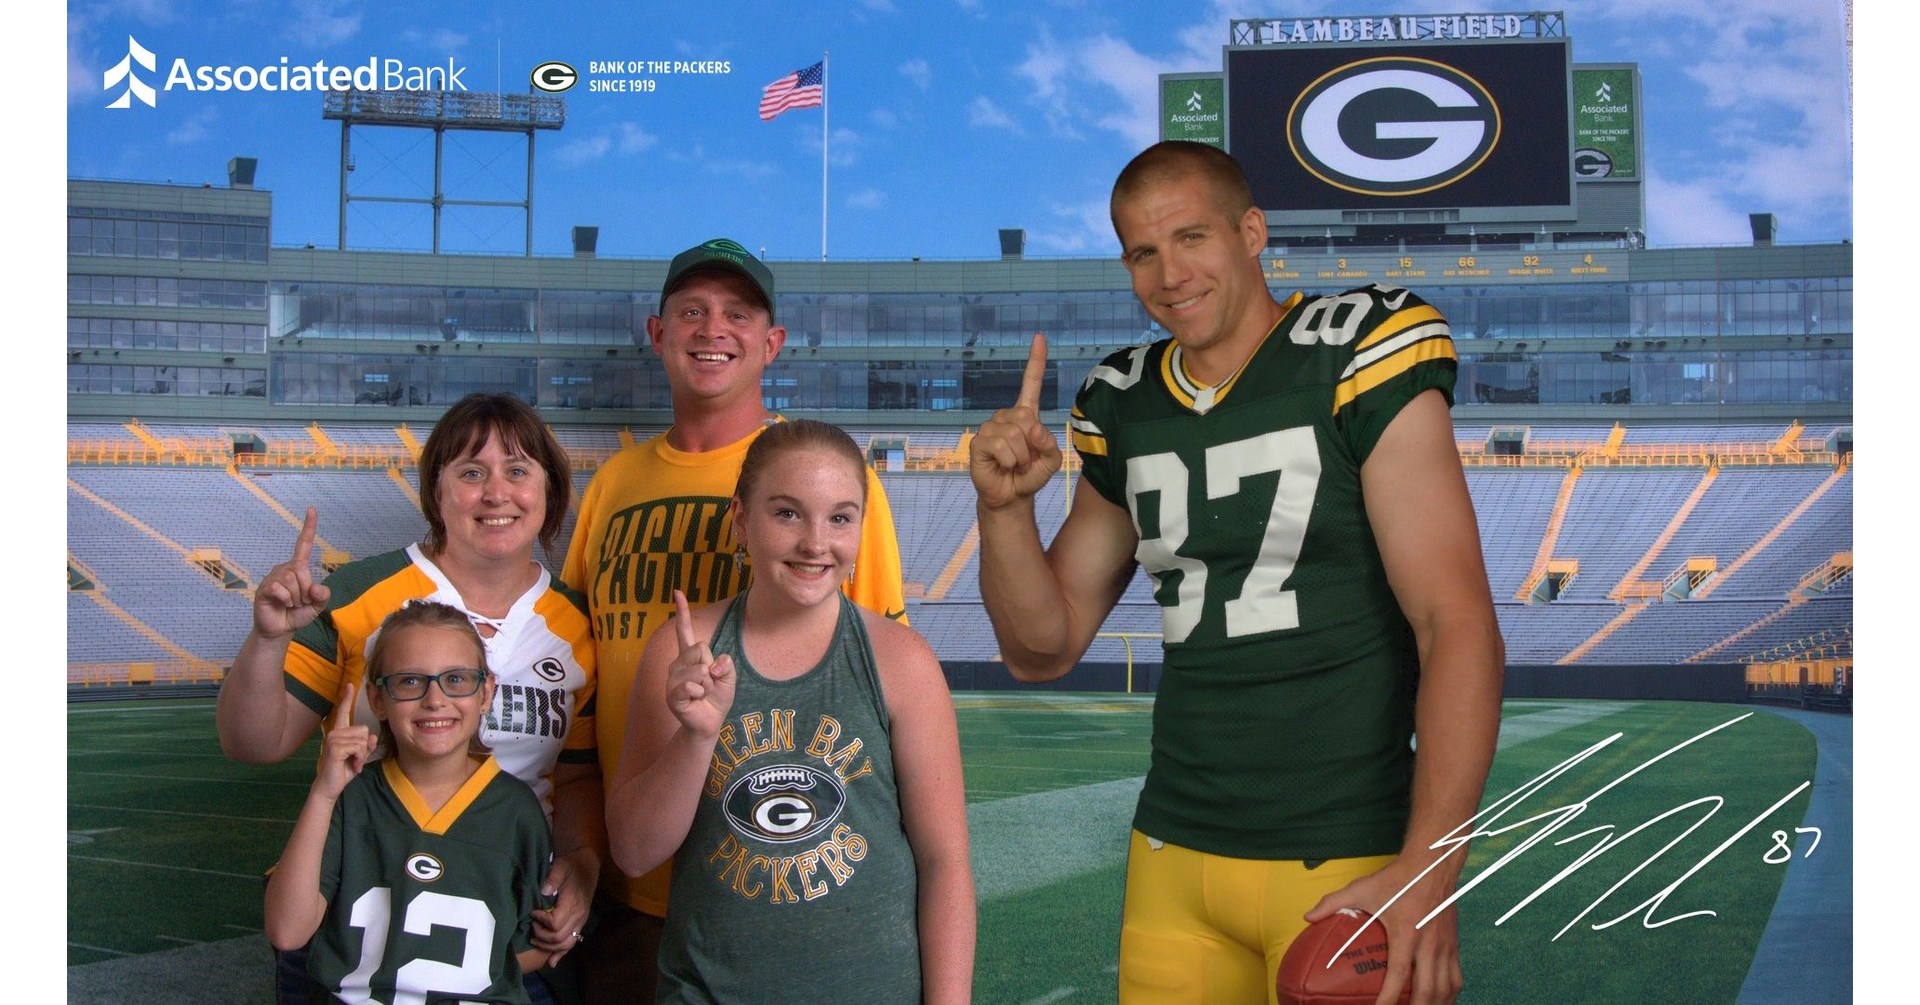 Packers fans offered unique experiences to 'Get Closer to the